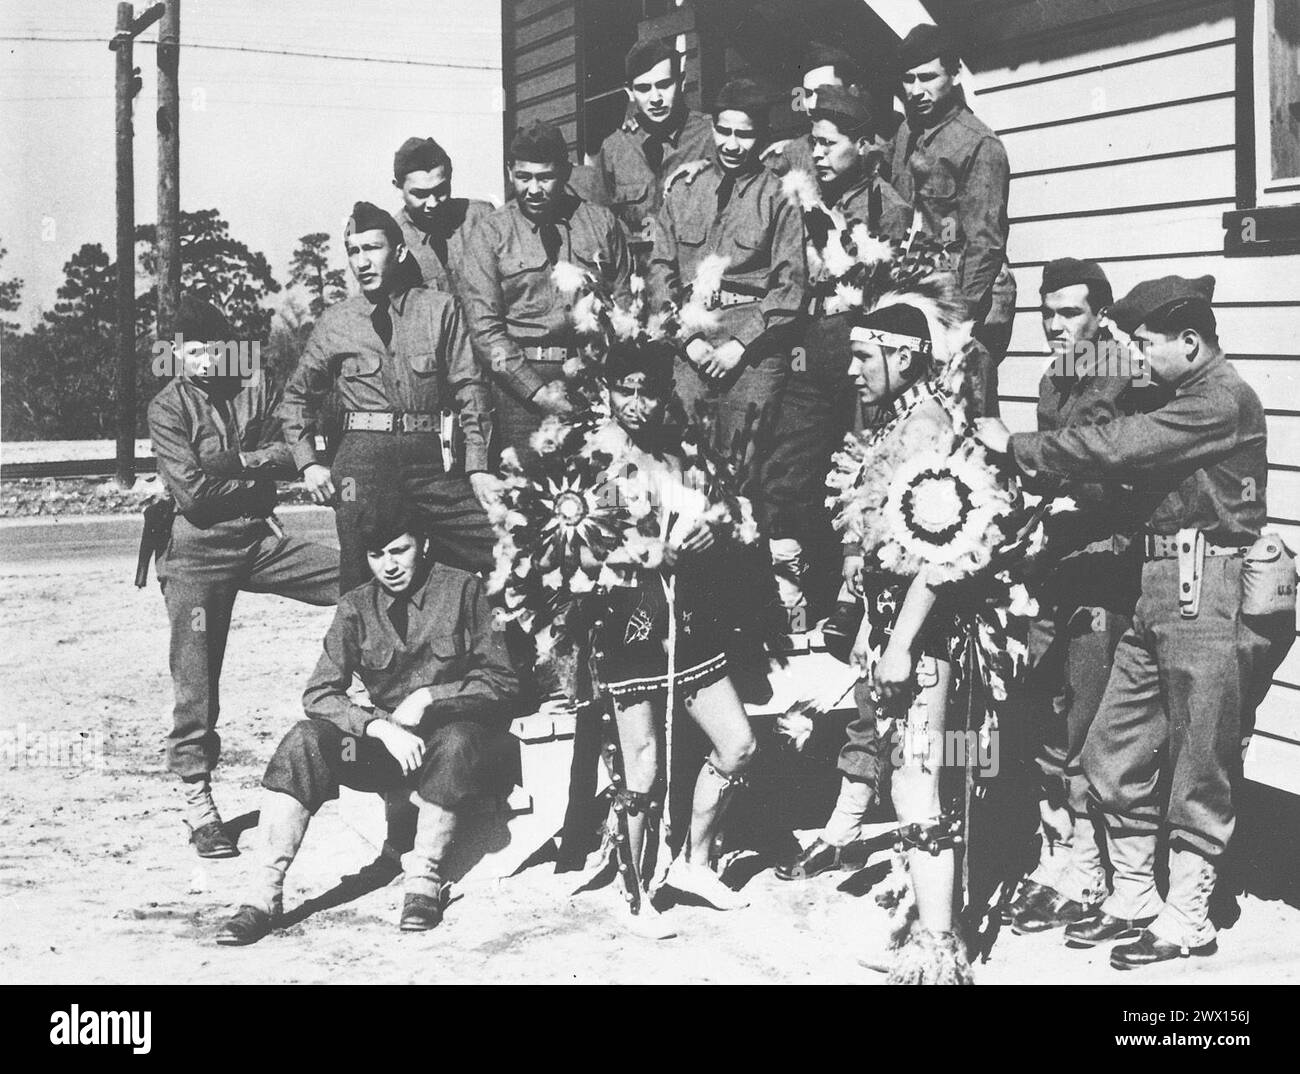 Native American Army Unit Poses for Promotional Photograph ca. 1920s or 1930s Stock Photo